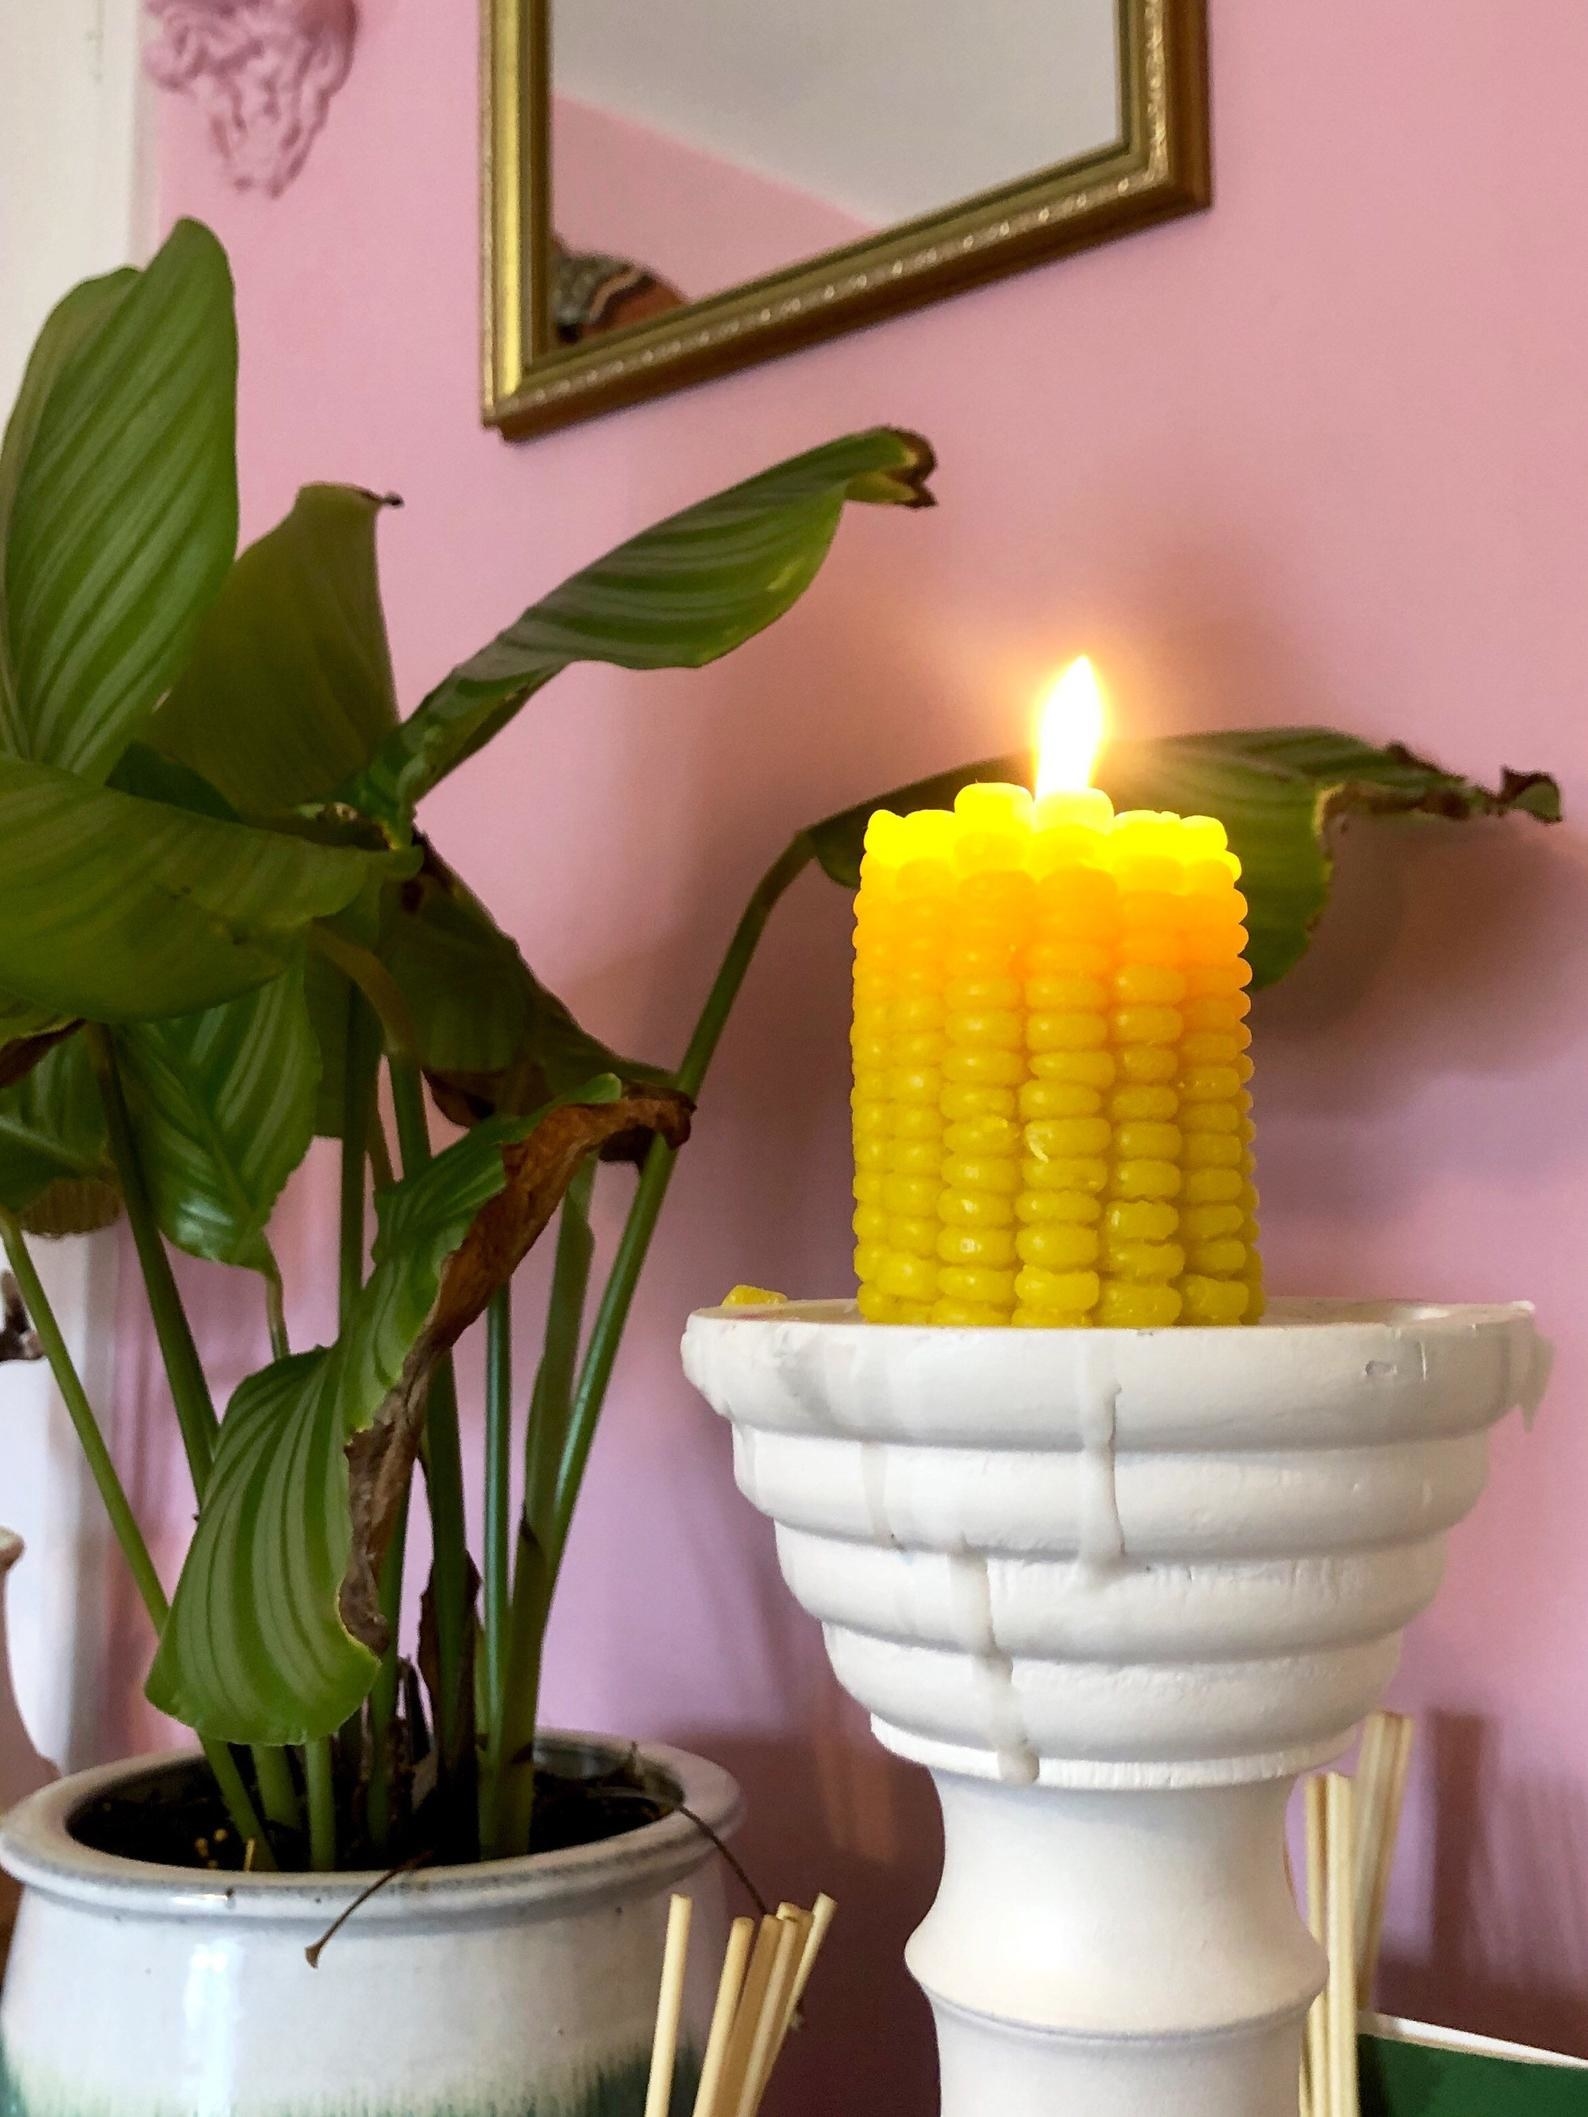 The lit corn candle